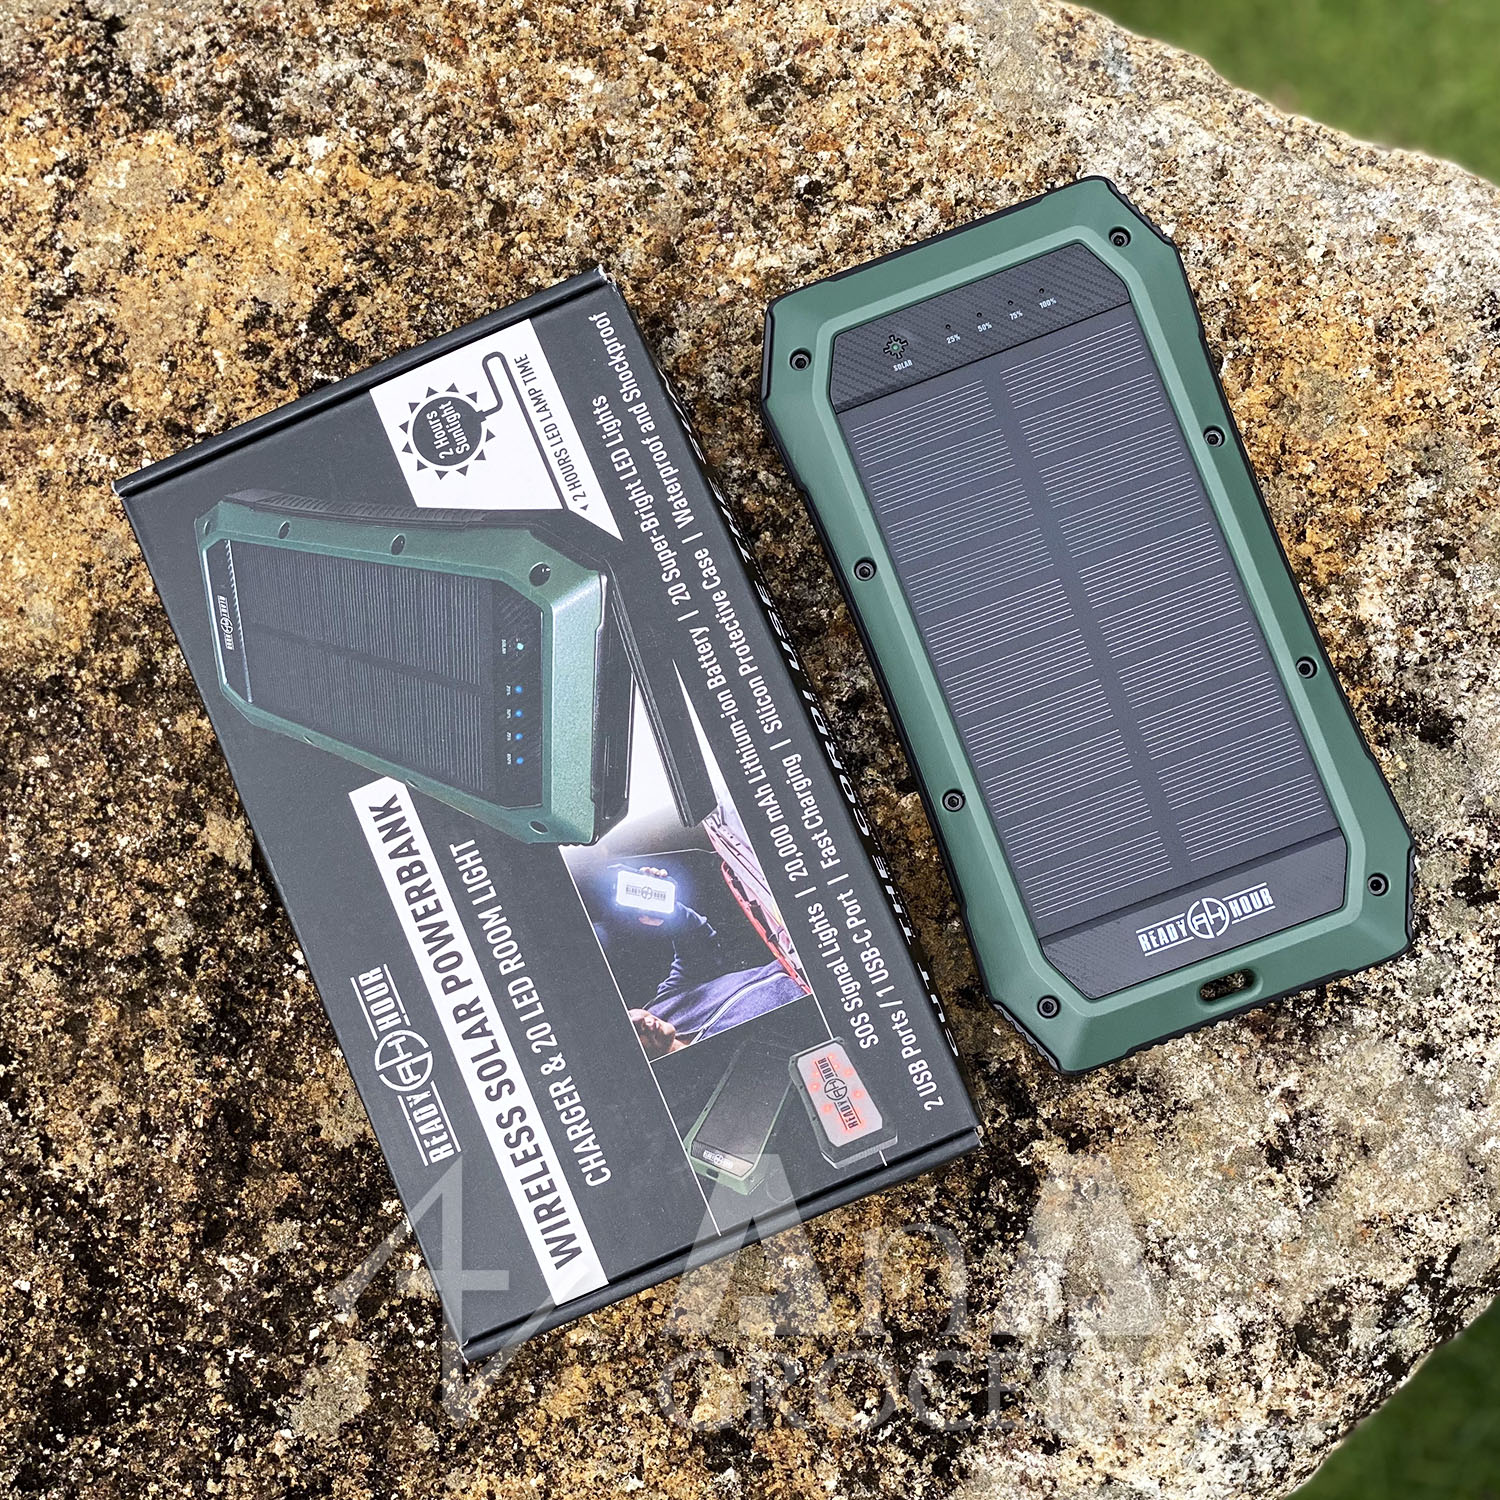 Wireless Ready Hour Solar Power Bank Charger & Room Light - 20,000 mAh